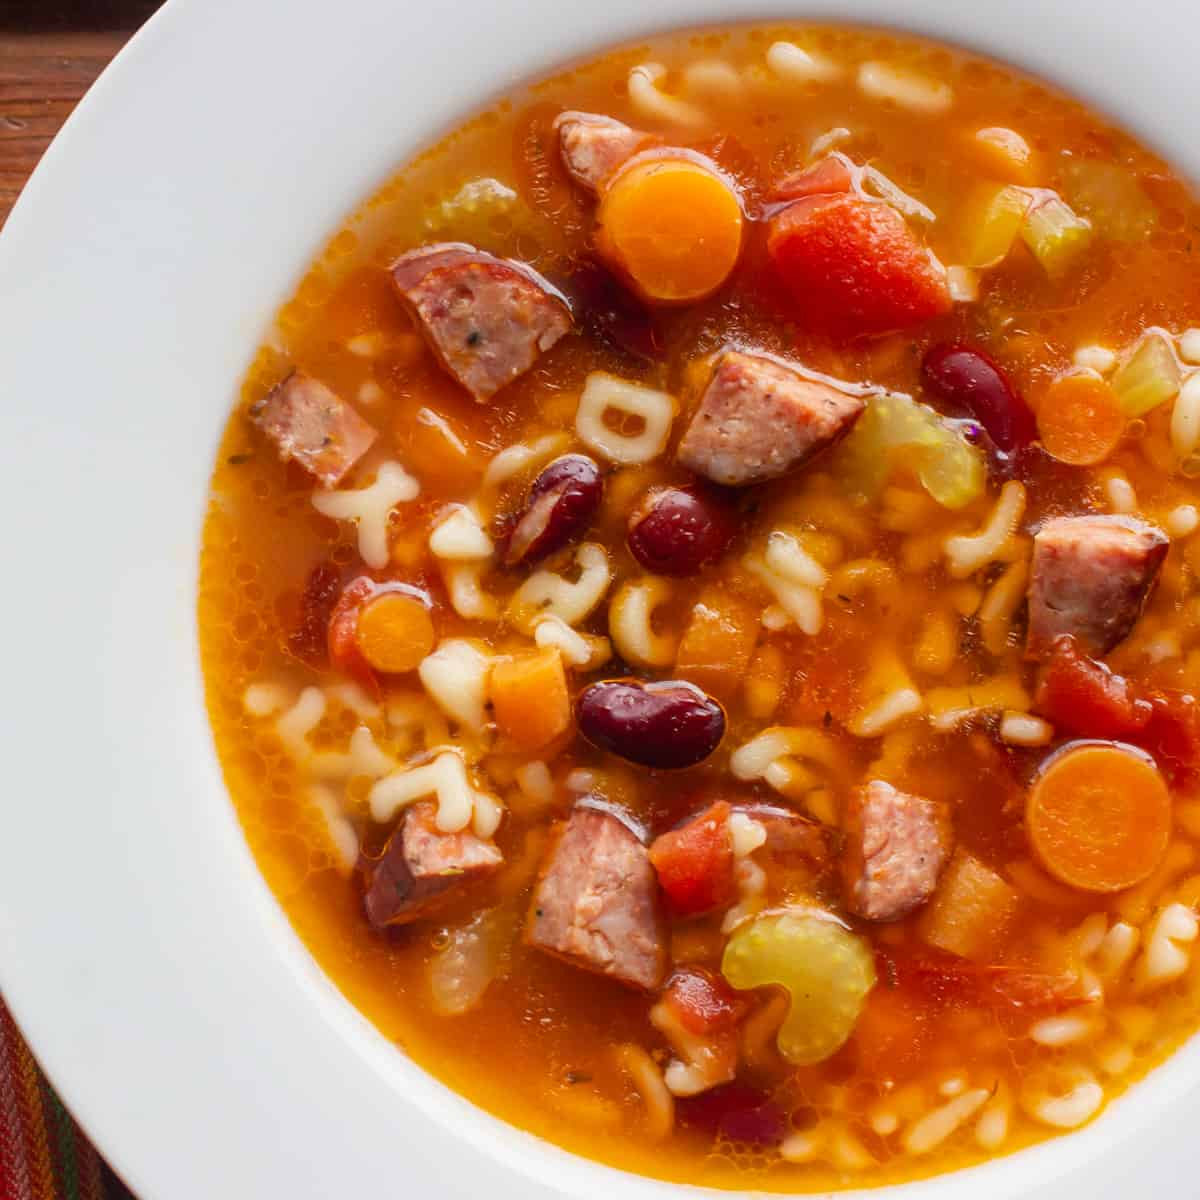 Soup with smoked sausage, carrots and pasta.